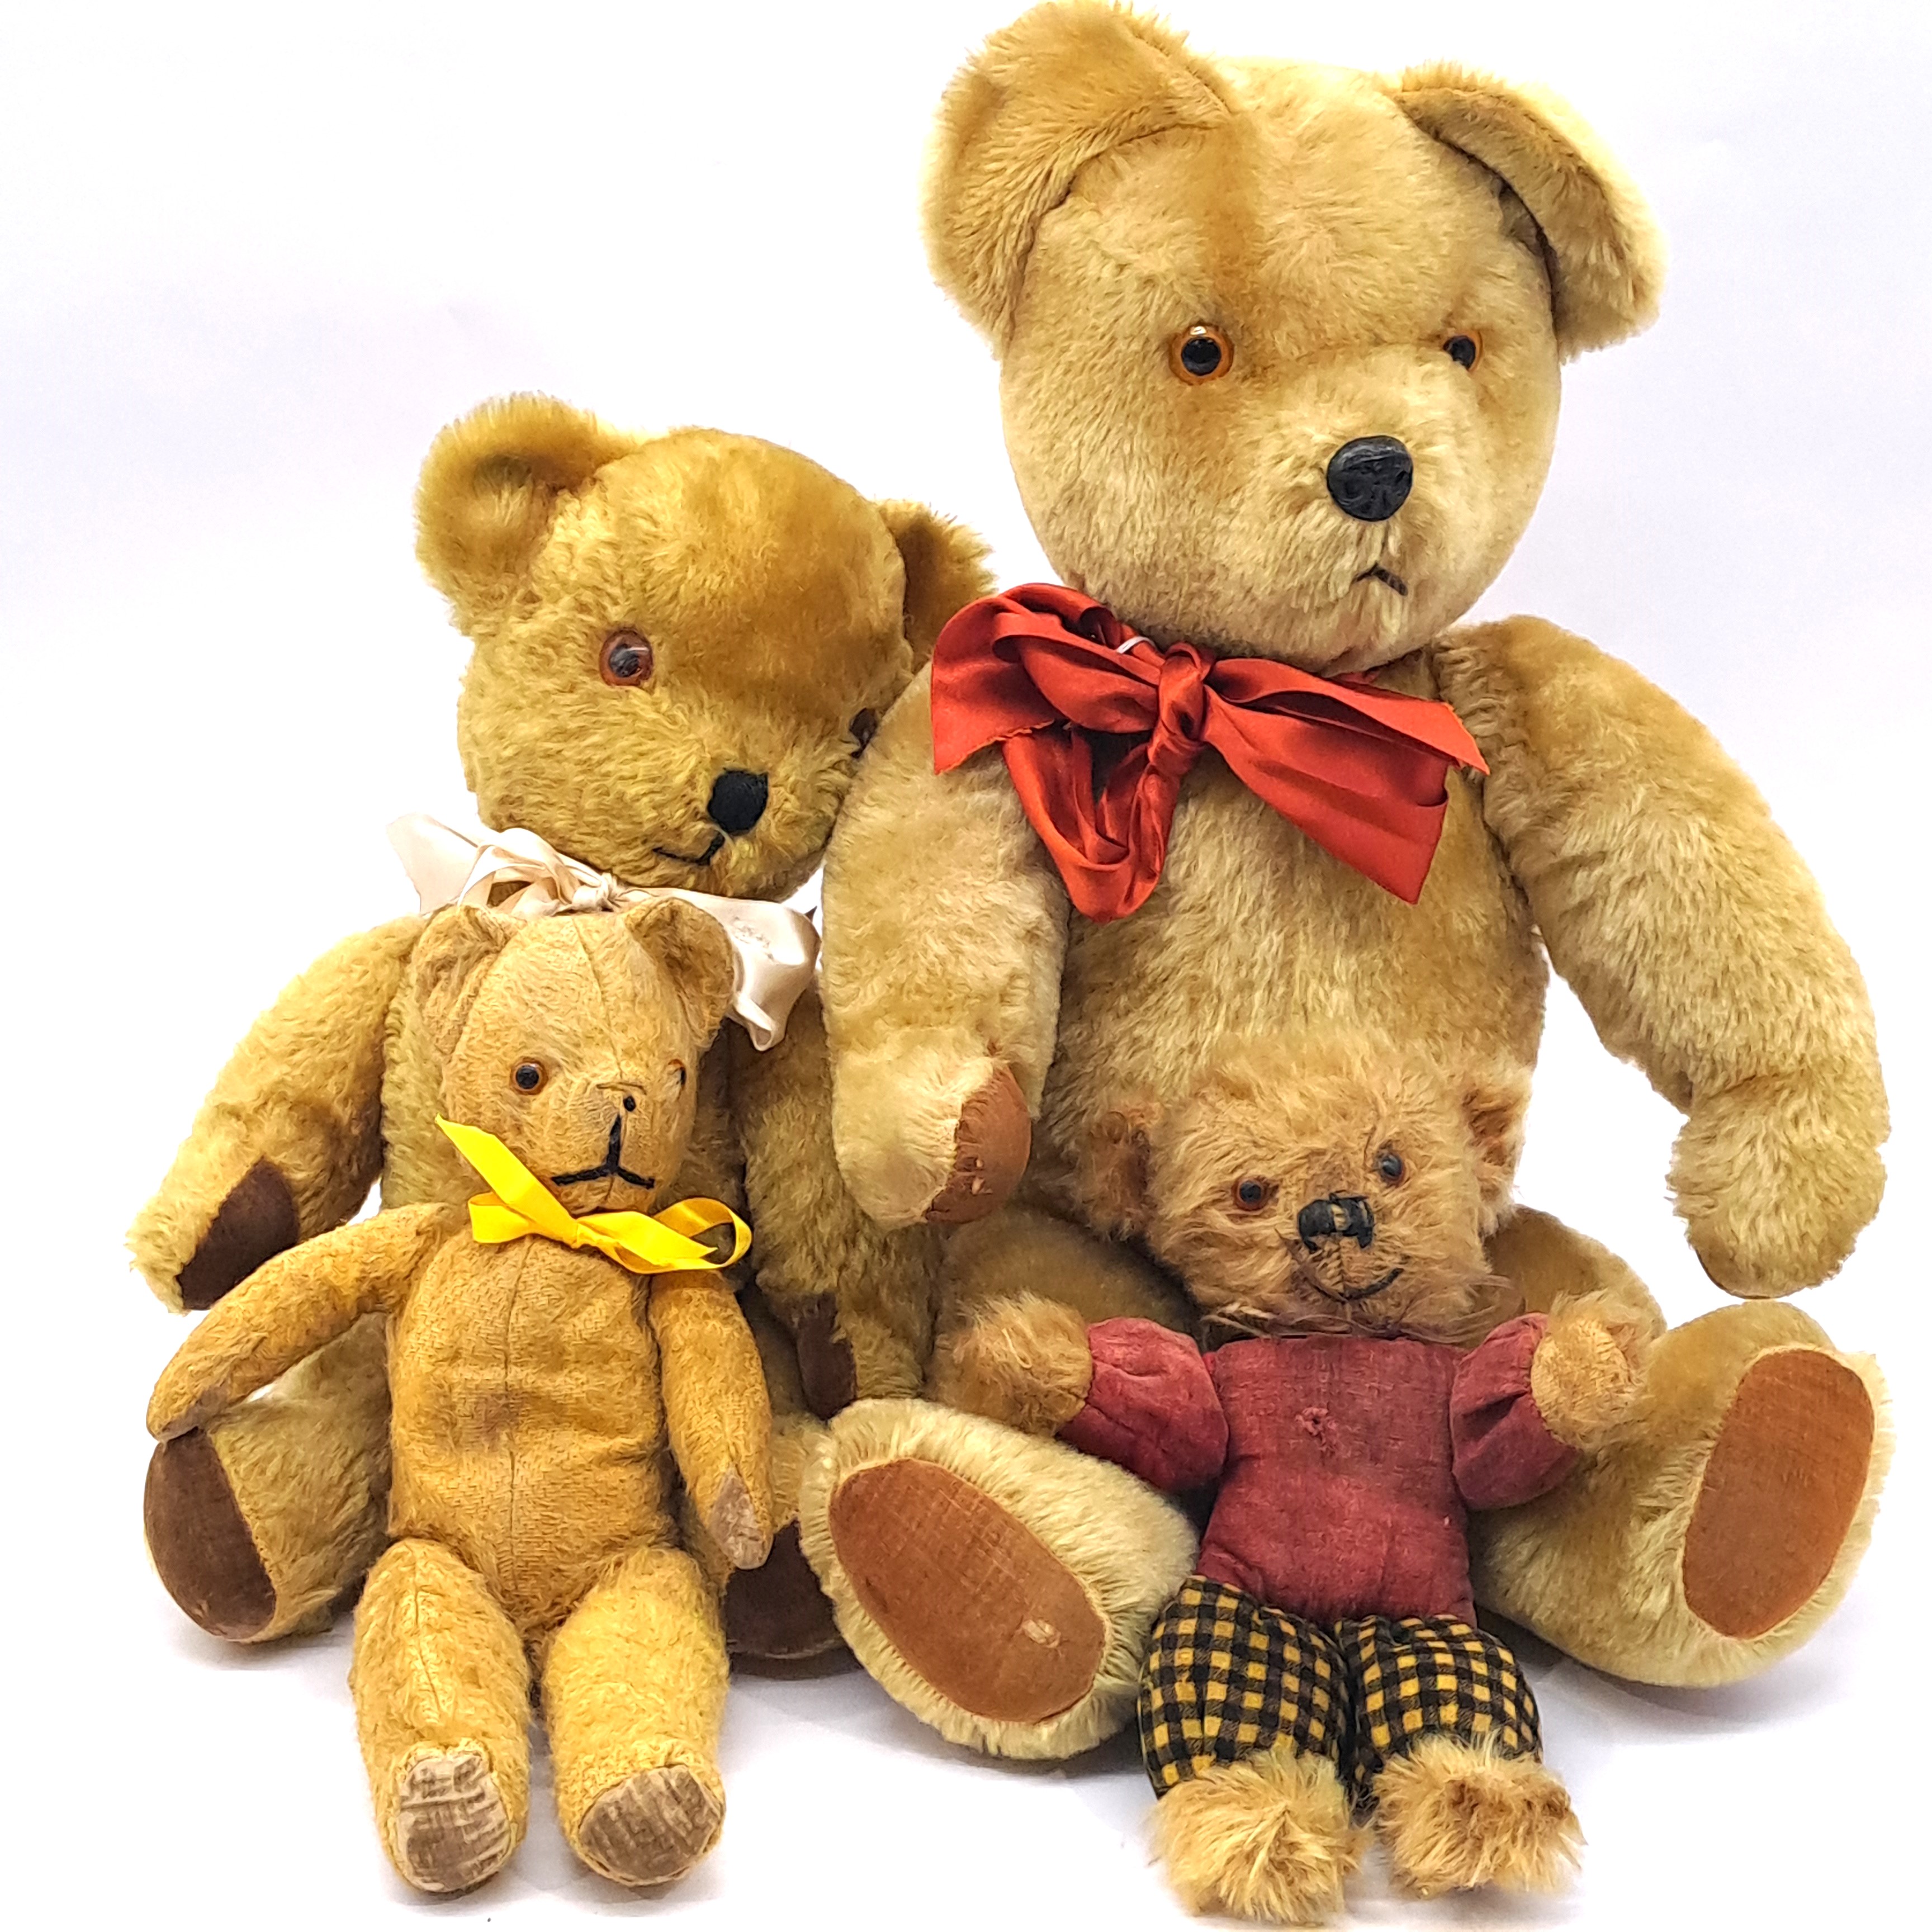 Pedigree collection of vintage teddy bears